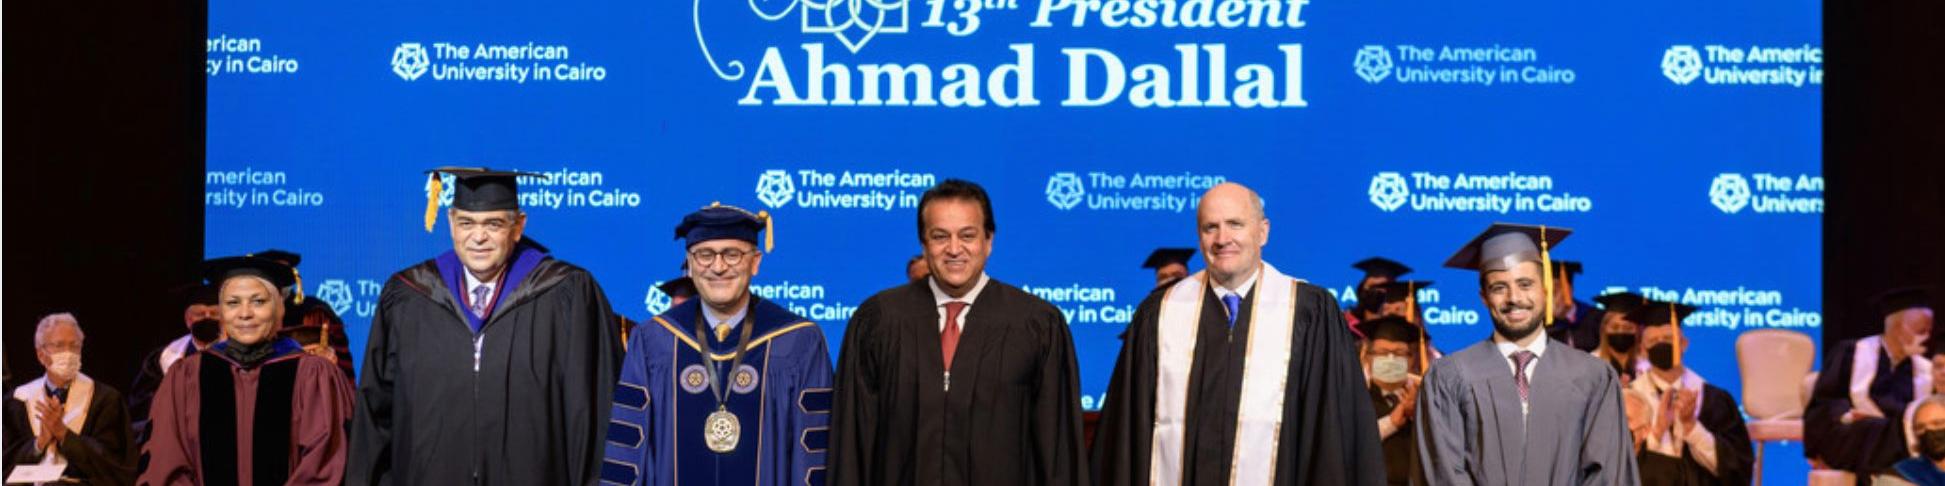 AUC Presidents Ahmad Dallal in his inauguration ceremony